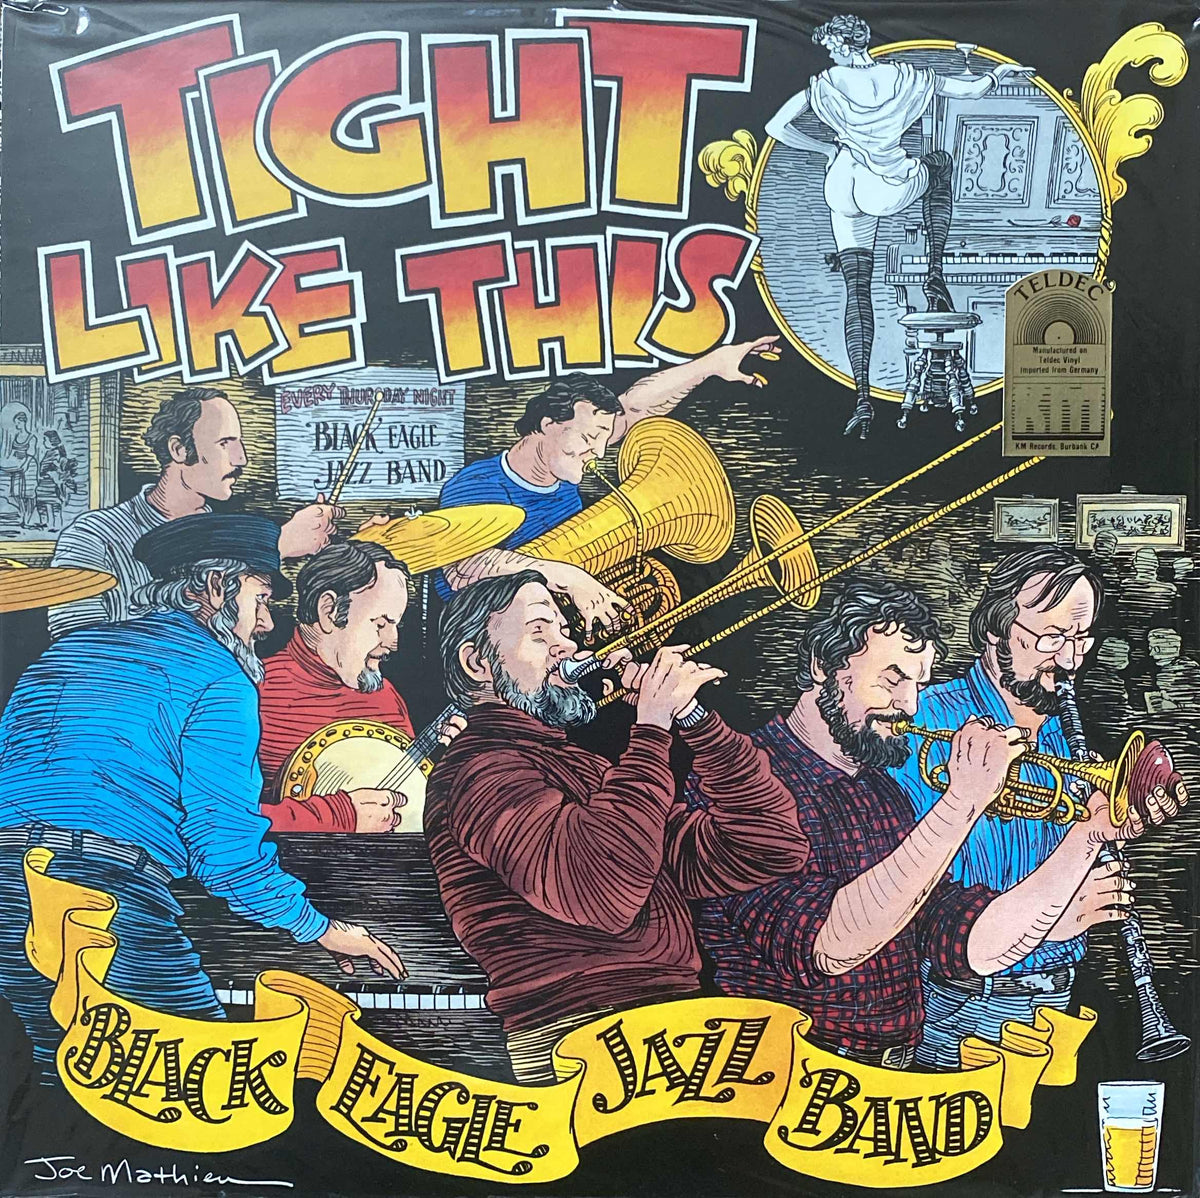 Colorful poster of the Black Eagle Jazz Band - Tight Like This, particularly the black eagle jazz band performing live with a dynamic illustration featuring musicians playing trombone, trumpet, and drums, complemented by vibrant text and whimsical background from Tandem Coffee Roasters.